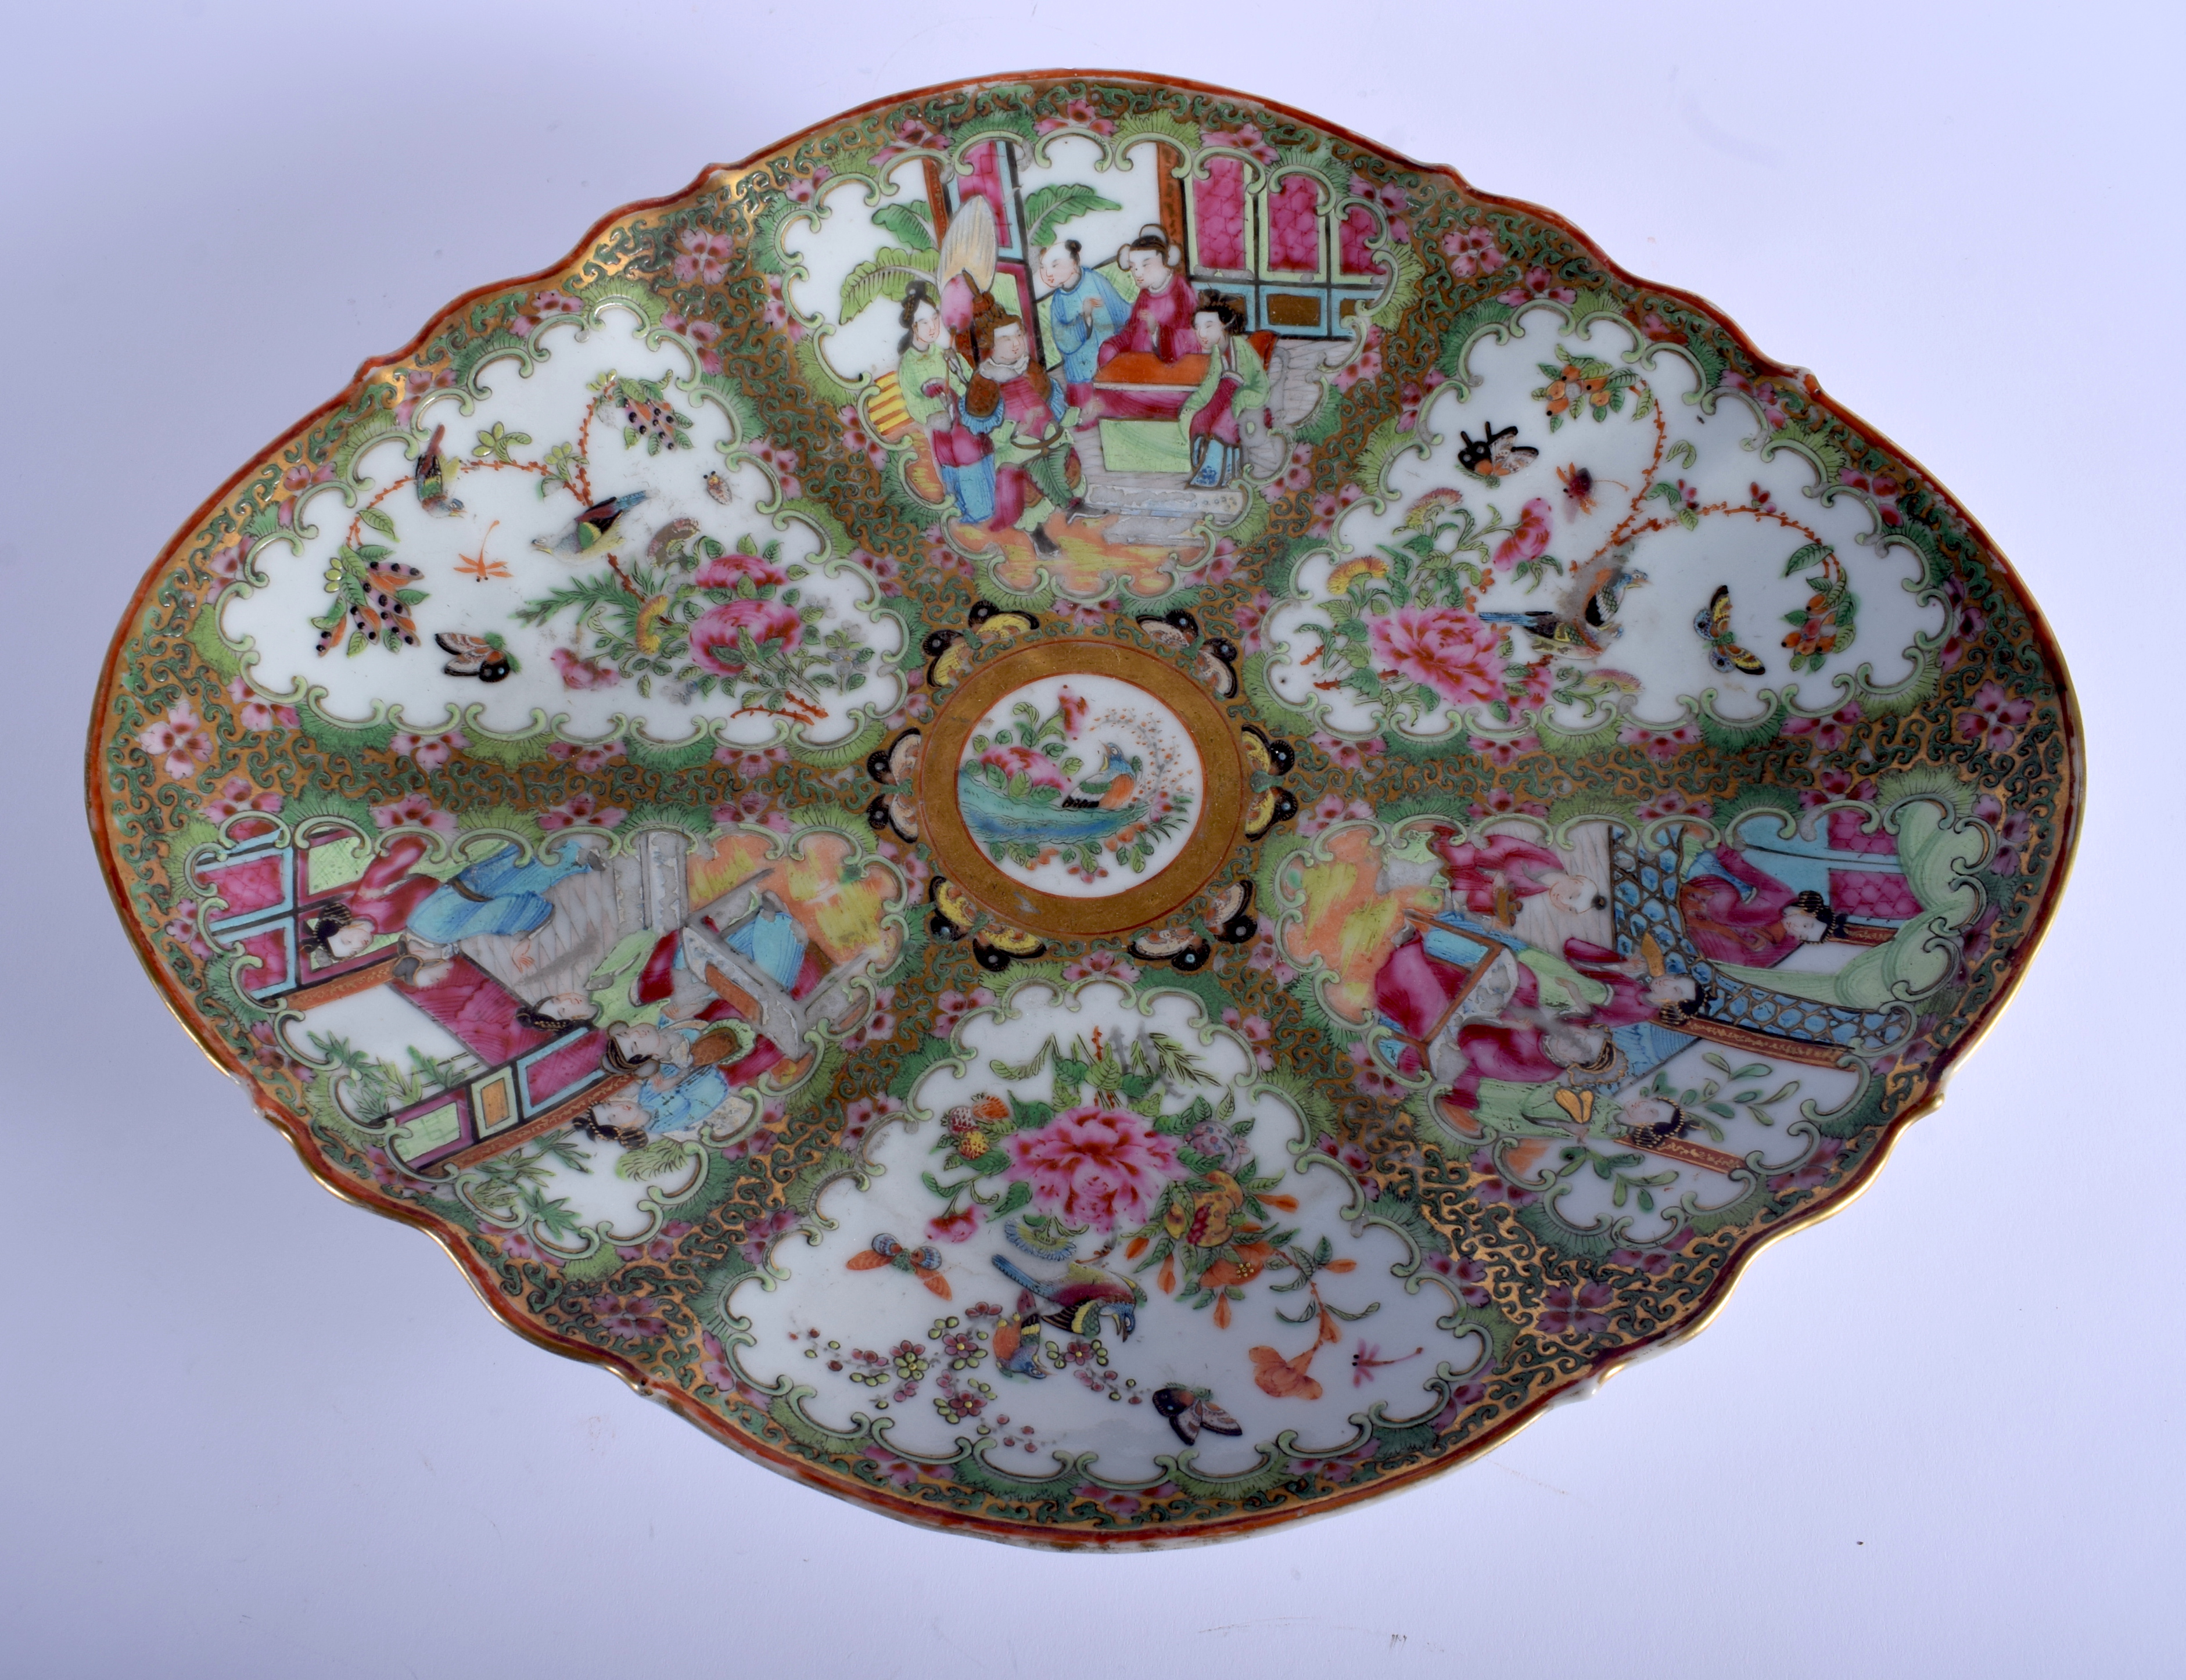 A LARGE 19TH CENTURY CHINESE CANTON FAMILLE ROSE LOBED DISH painted with figures and landscapes. 38